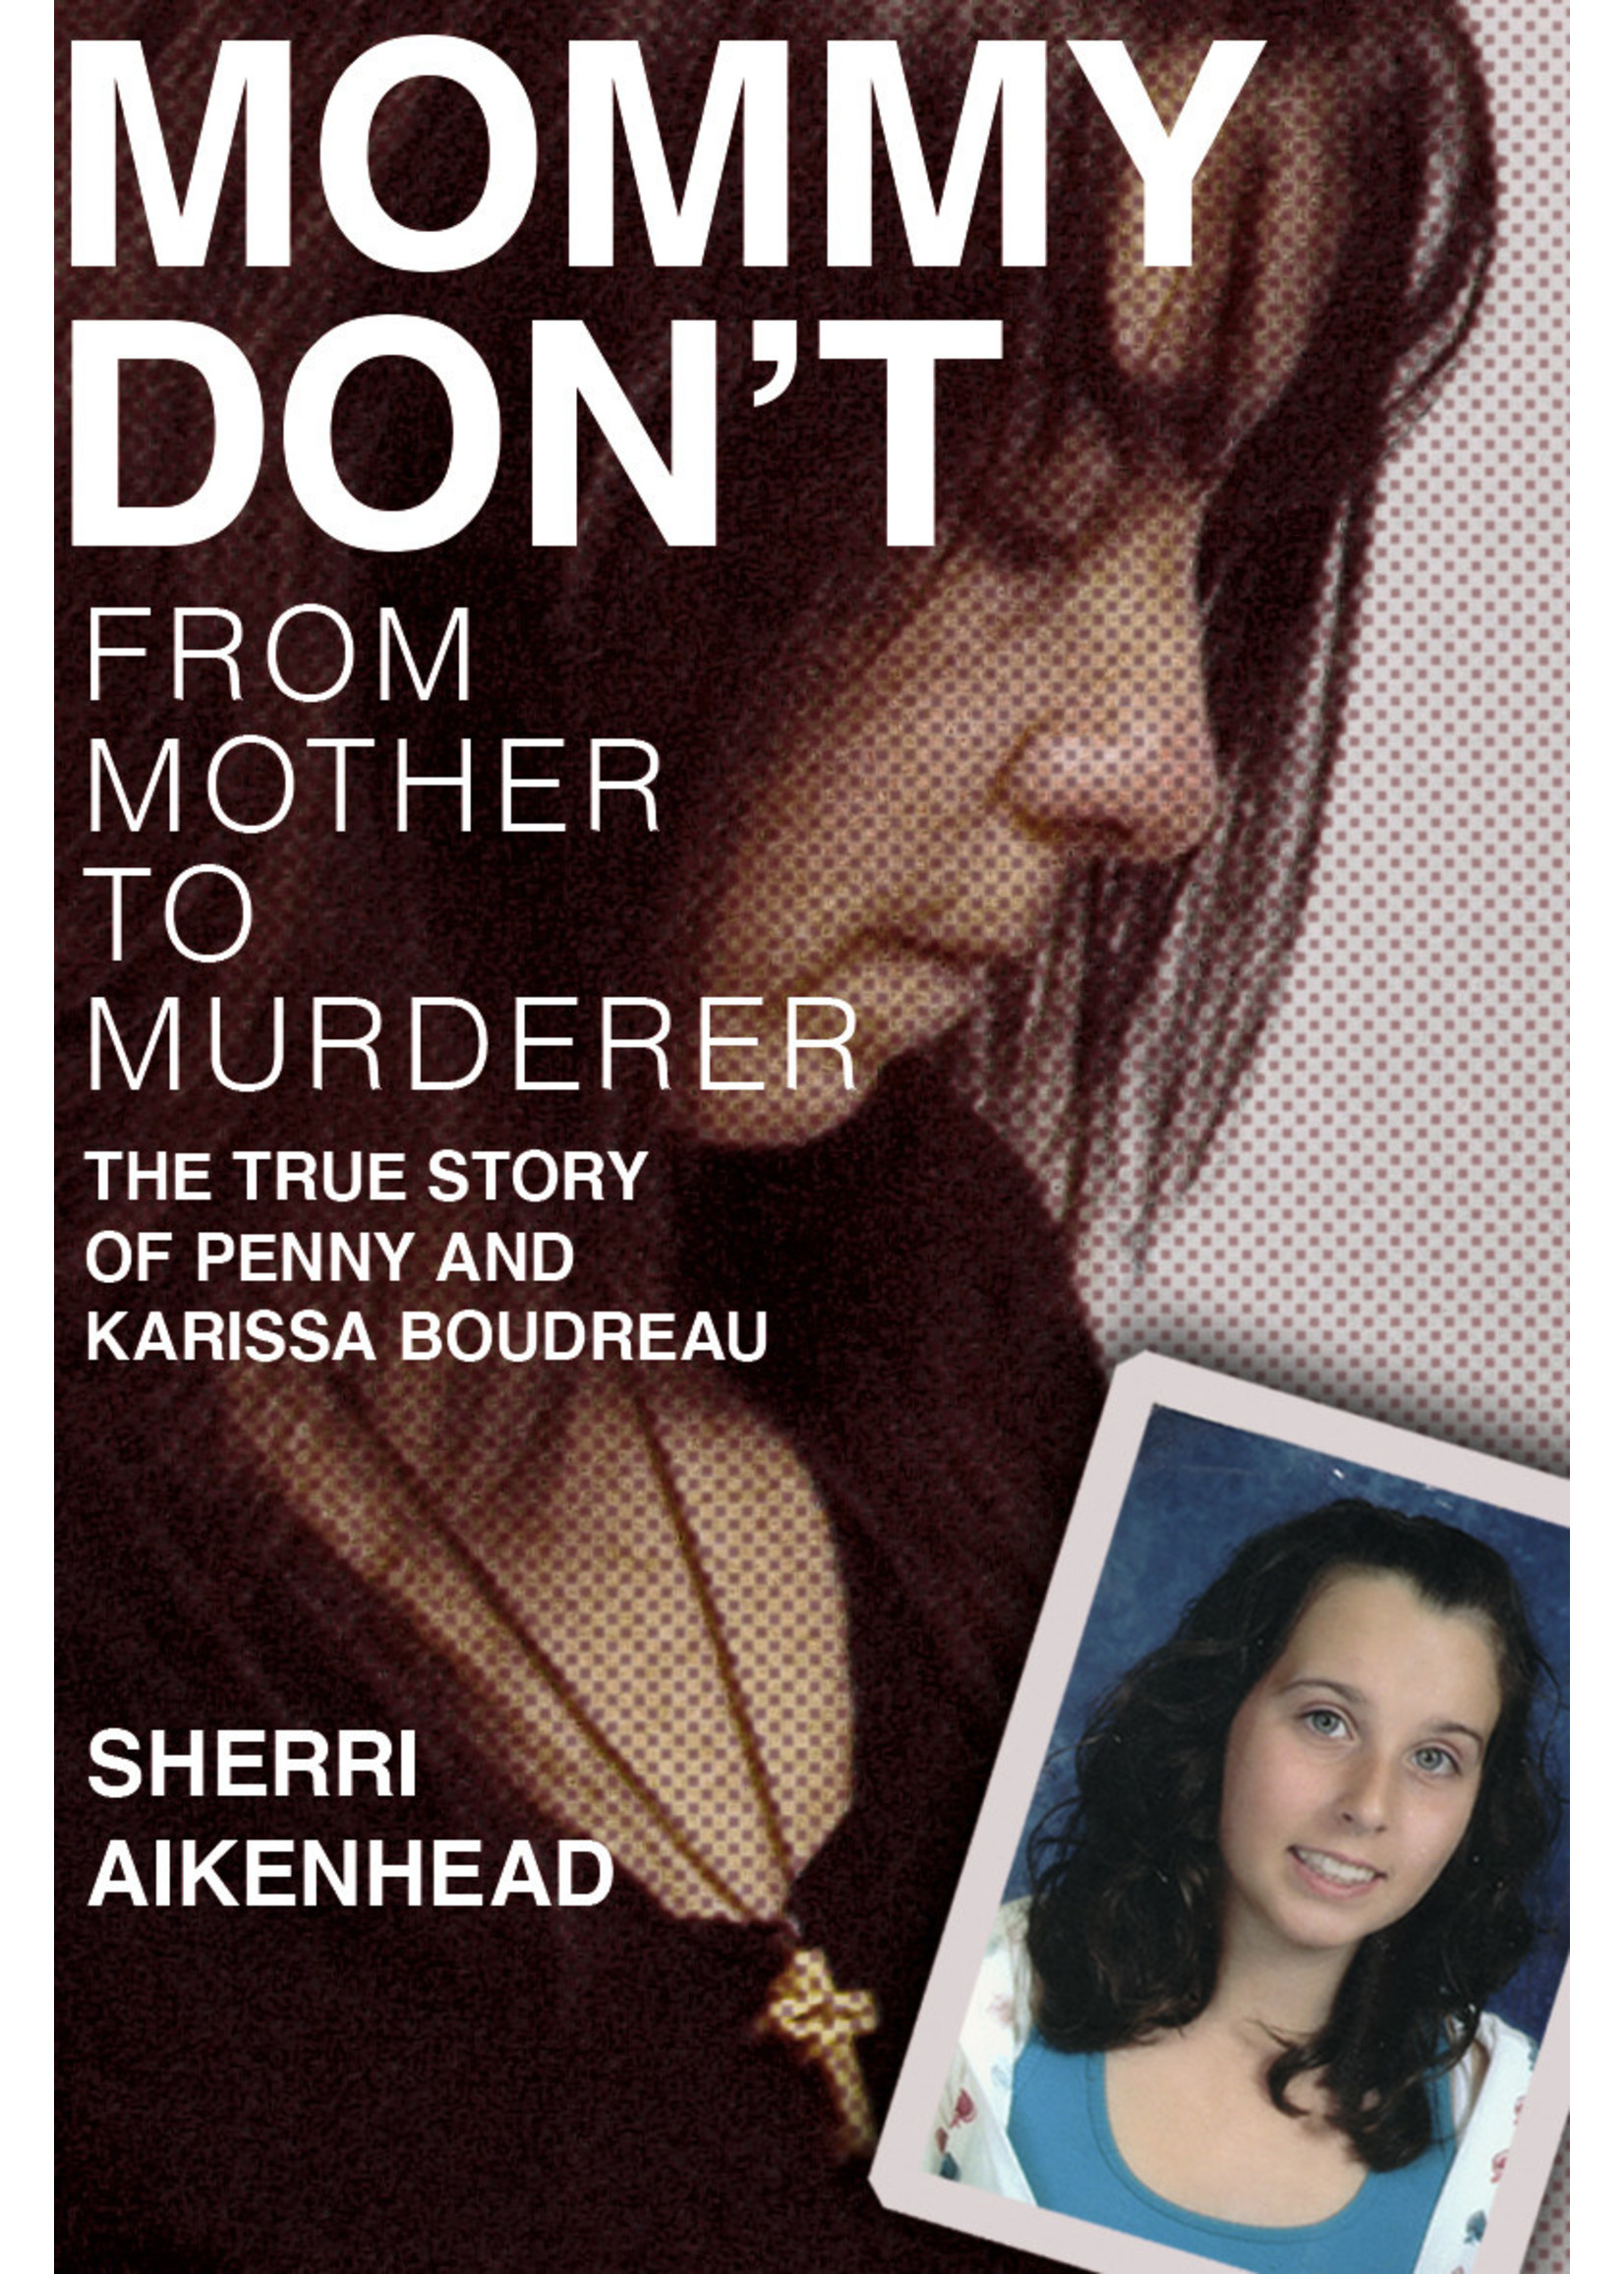 Mommy Don't: From Mother to Murderer, The True Story of Penny and Karissa Boudreau by Sherri Aikenhead